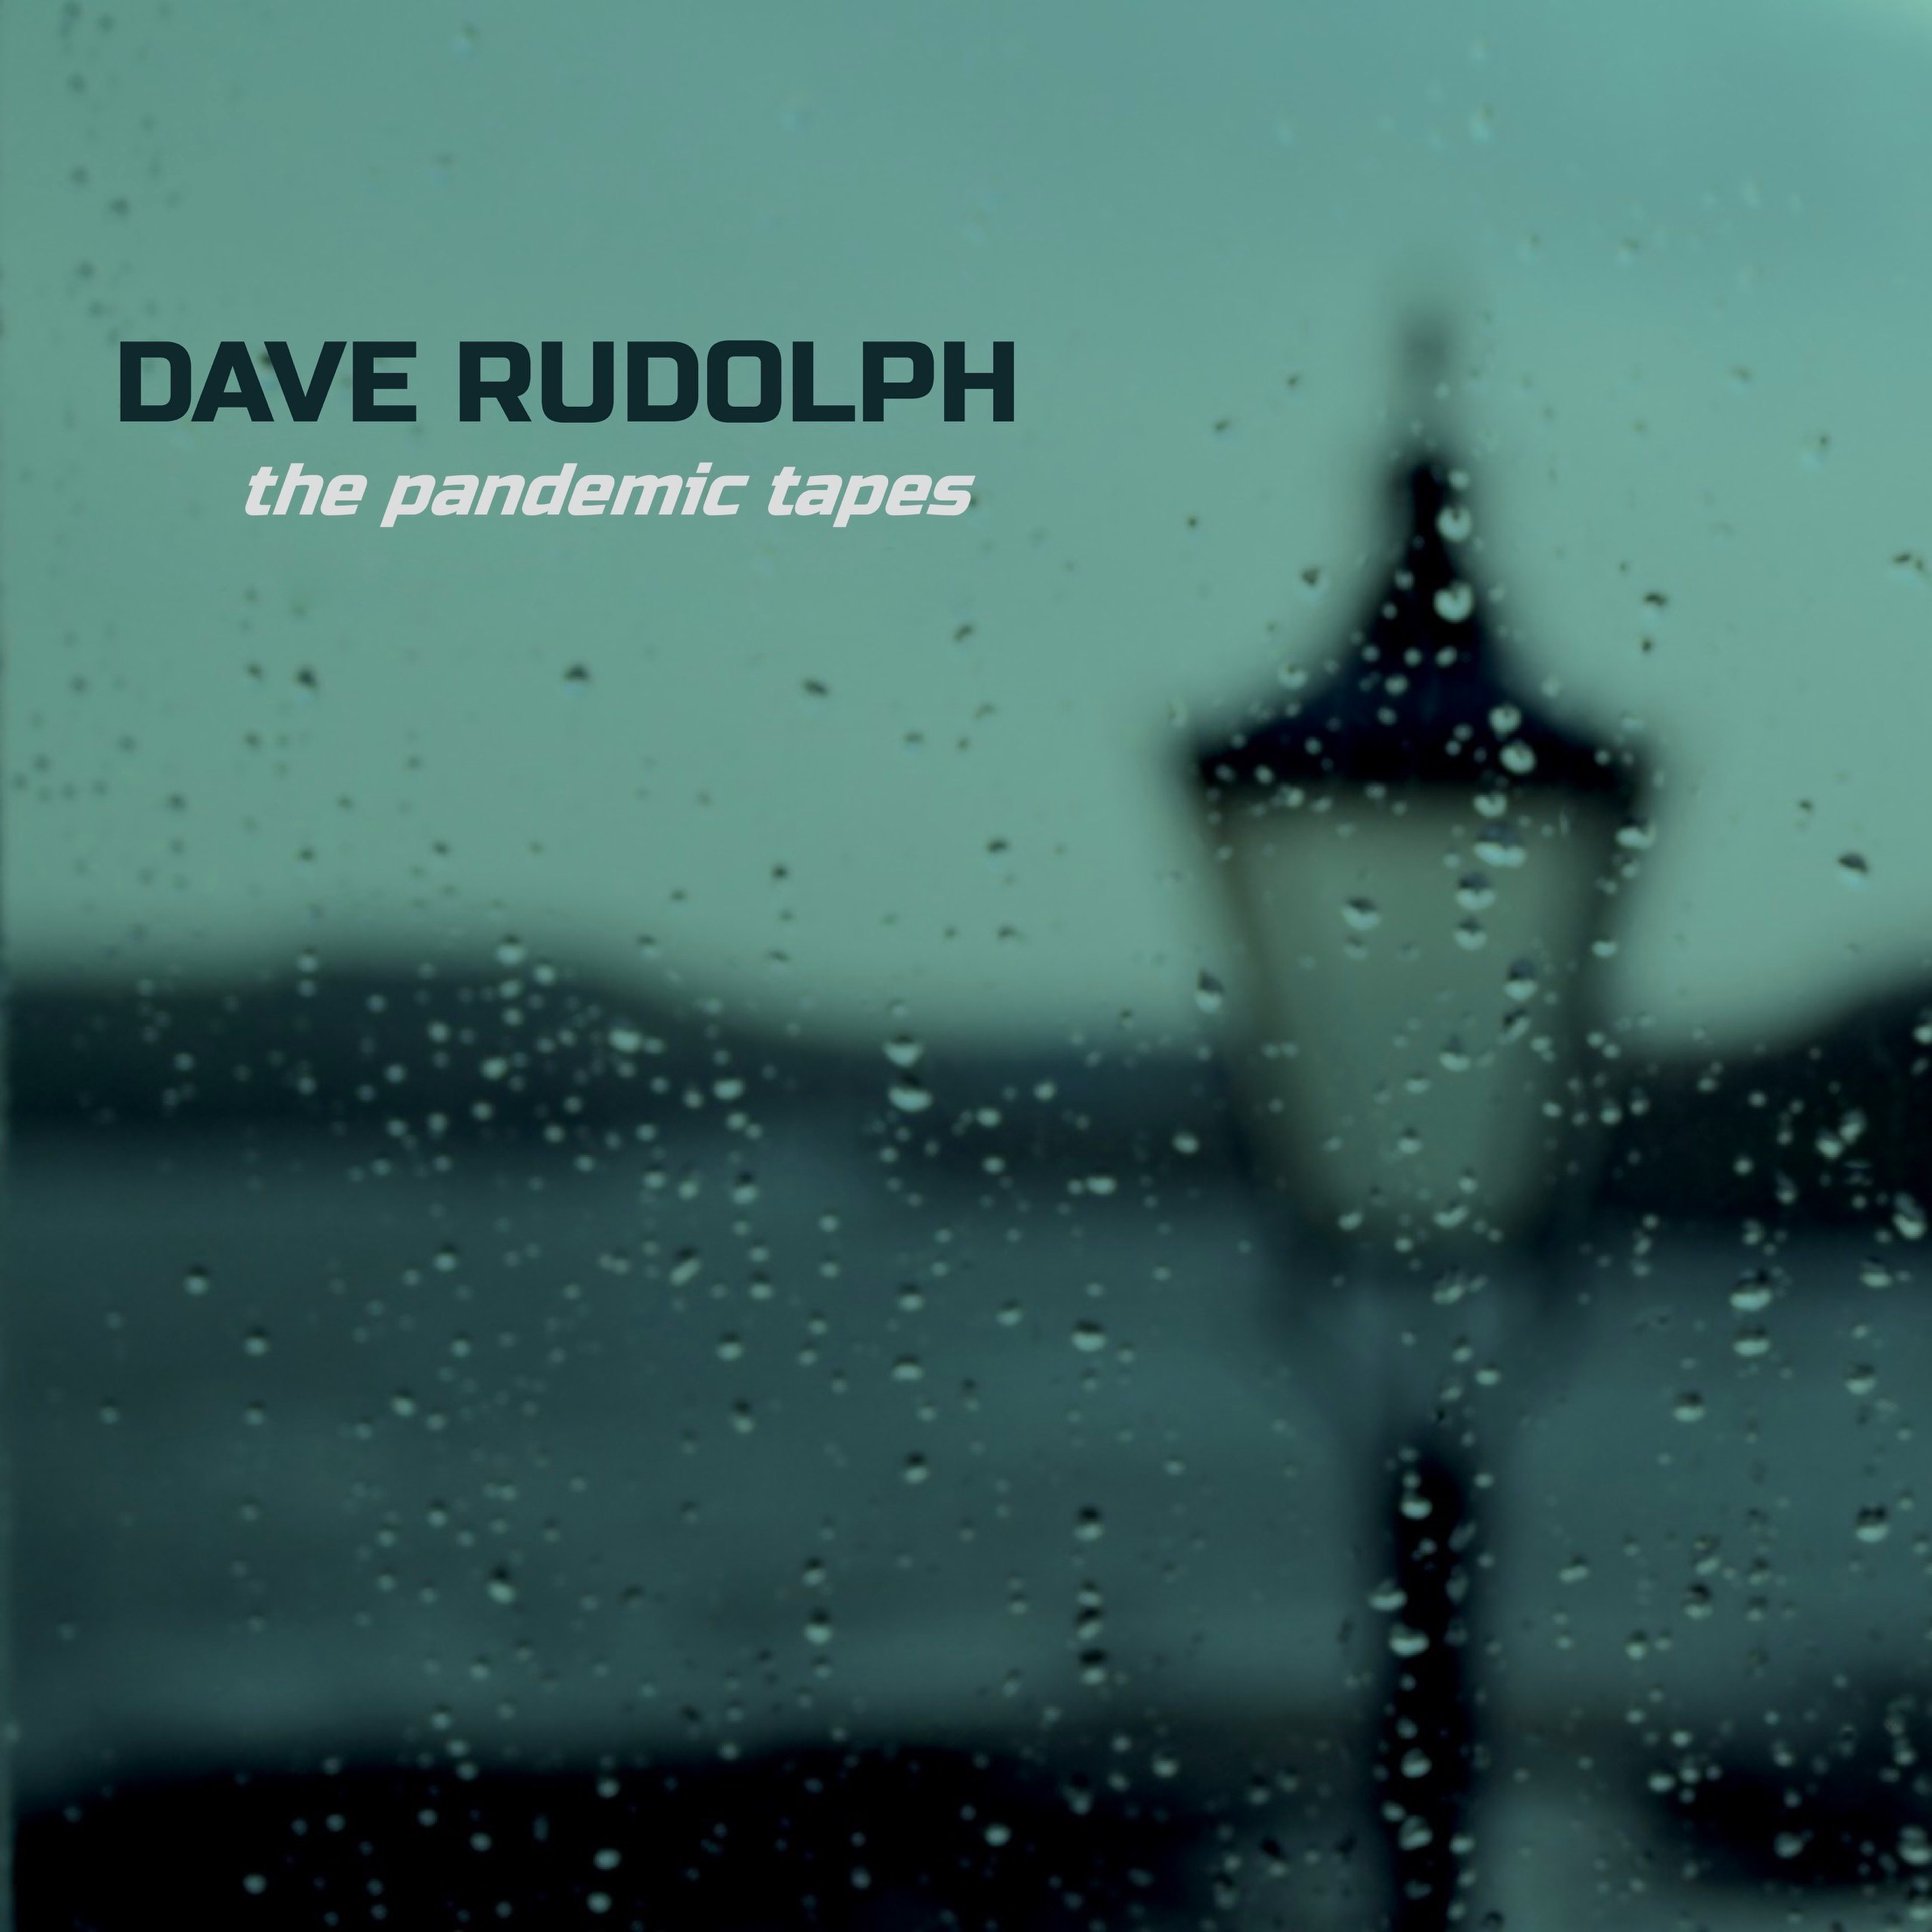 Dave Rudolph The Pandemic Tapes Album Cover Art CD Record Official Country Rock Outlaw